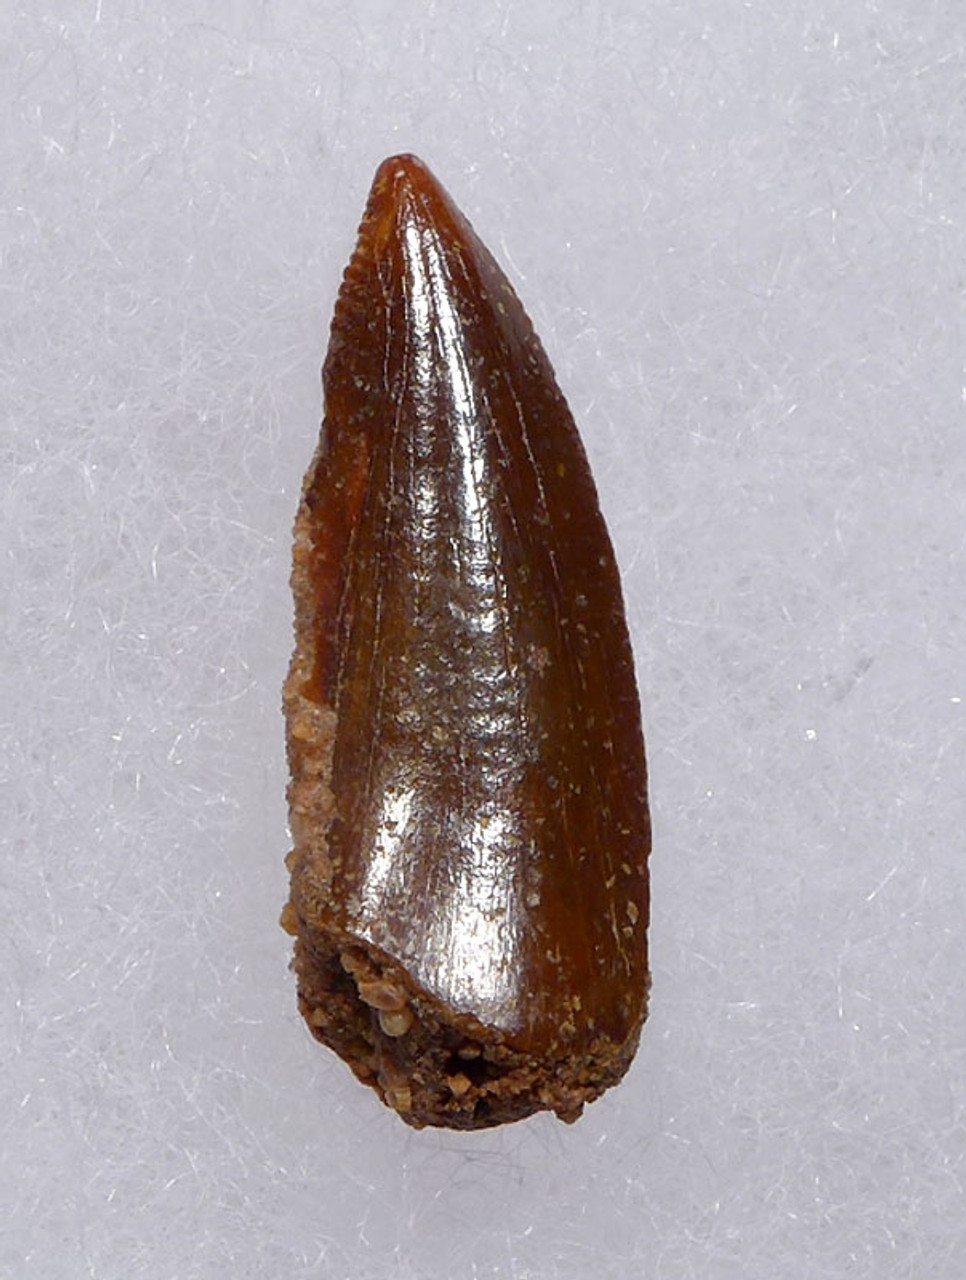 " RAPTOR " FOSSIL DINOSAUR TOOTH FROM A LARGE DROMAEOSAUR *DT6-312